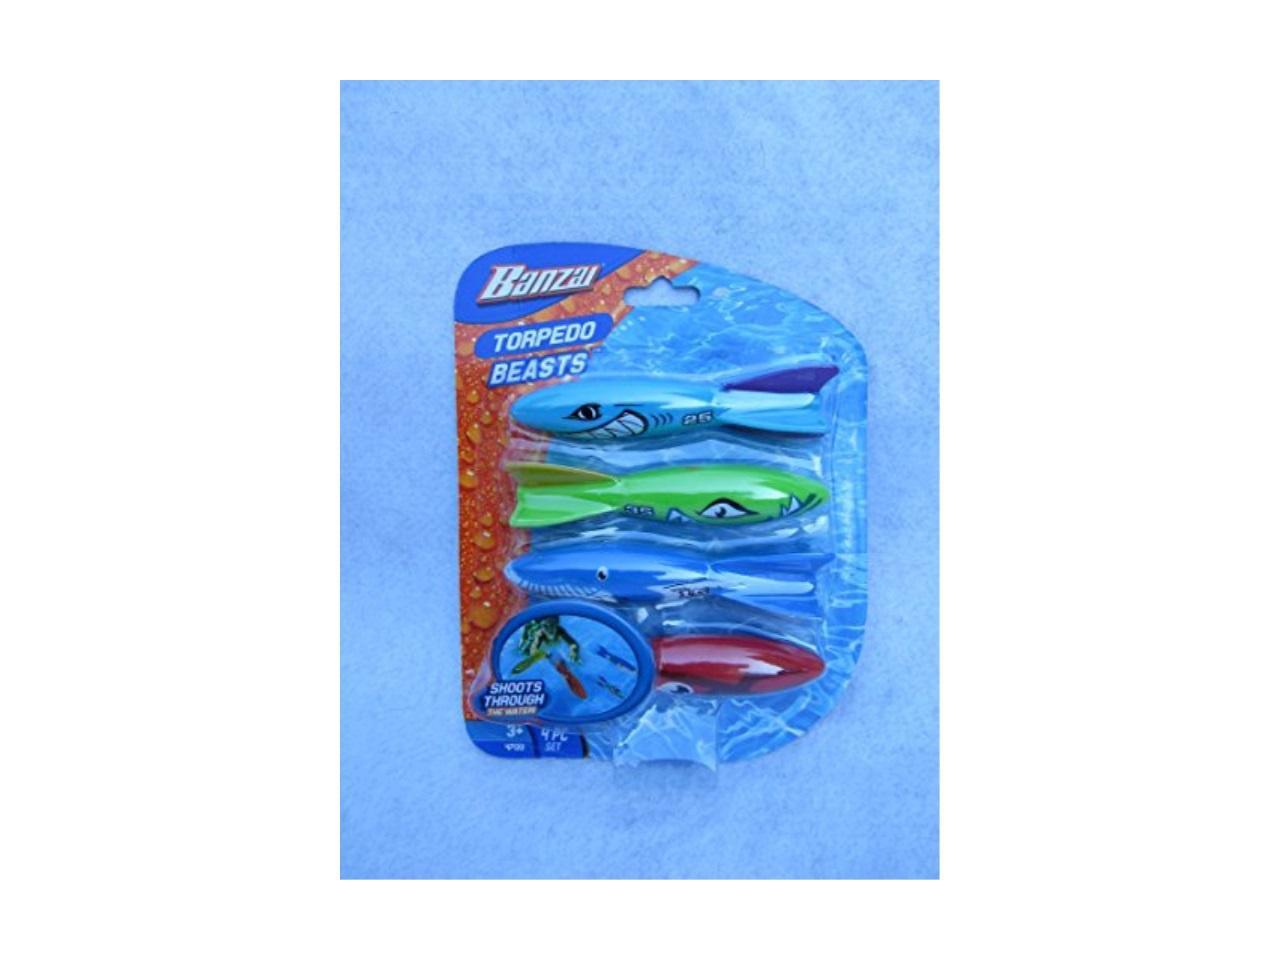 4 in a Pack Banzai Swimming Pool Diving Toys Torpedo Beasts Sharks Ages 3+ 